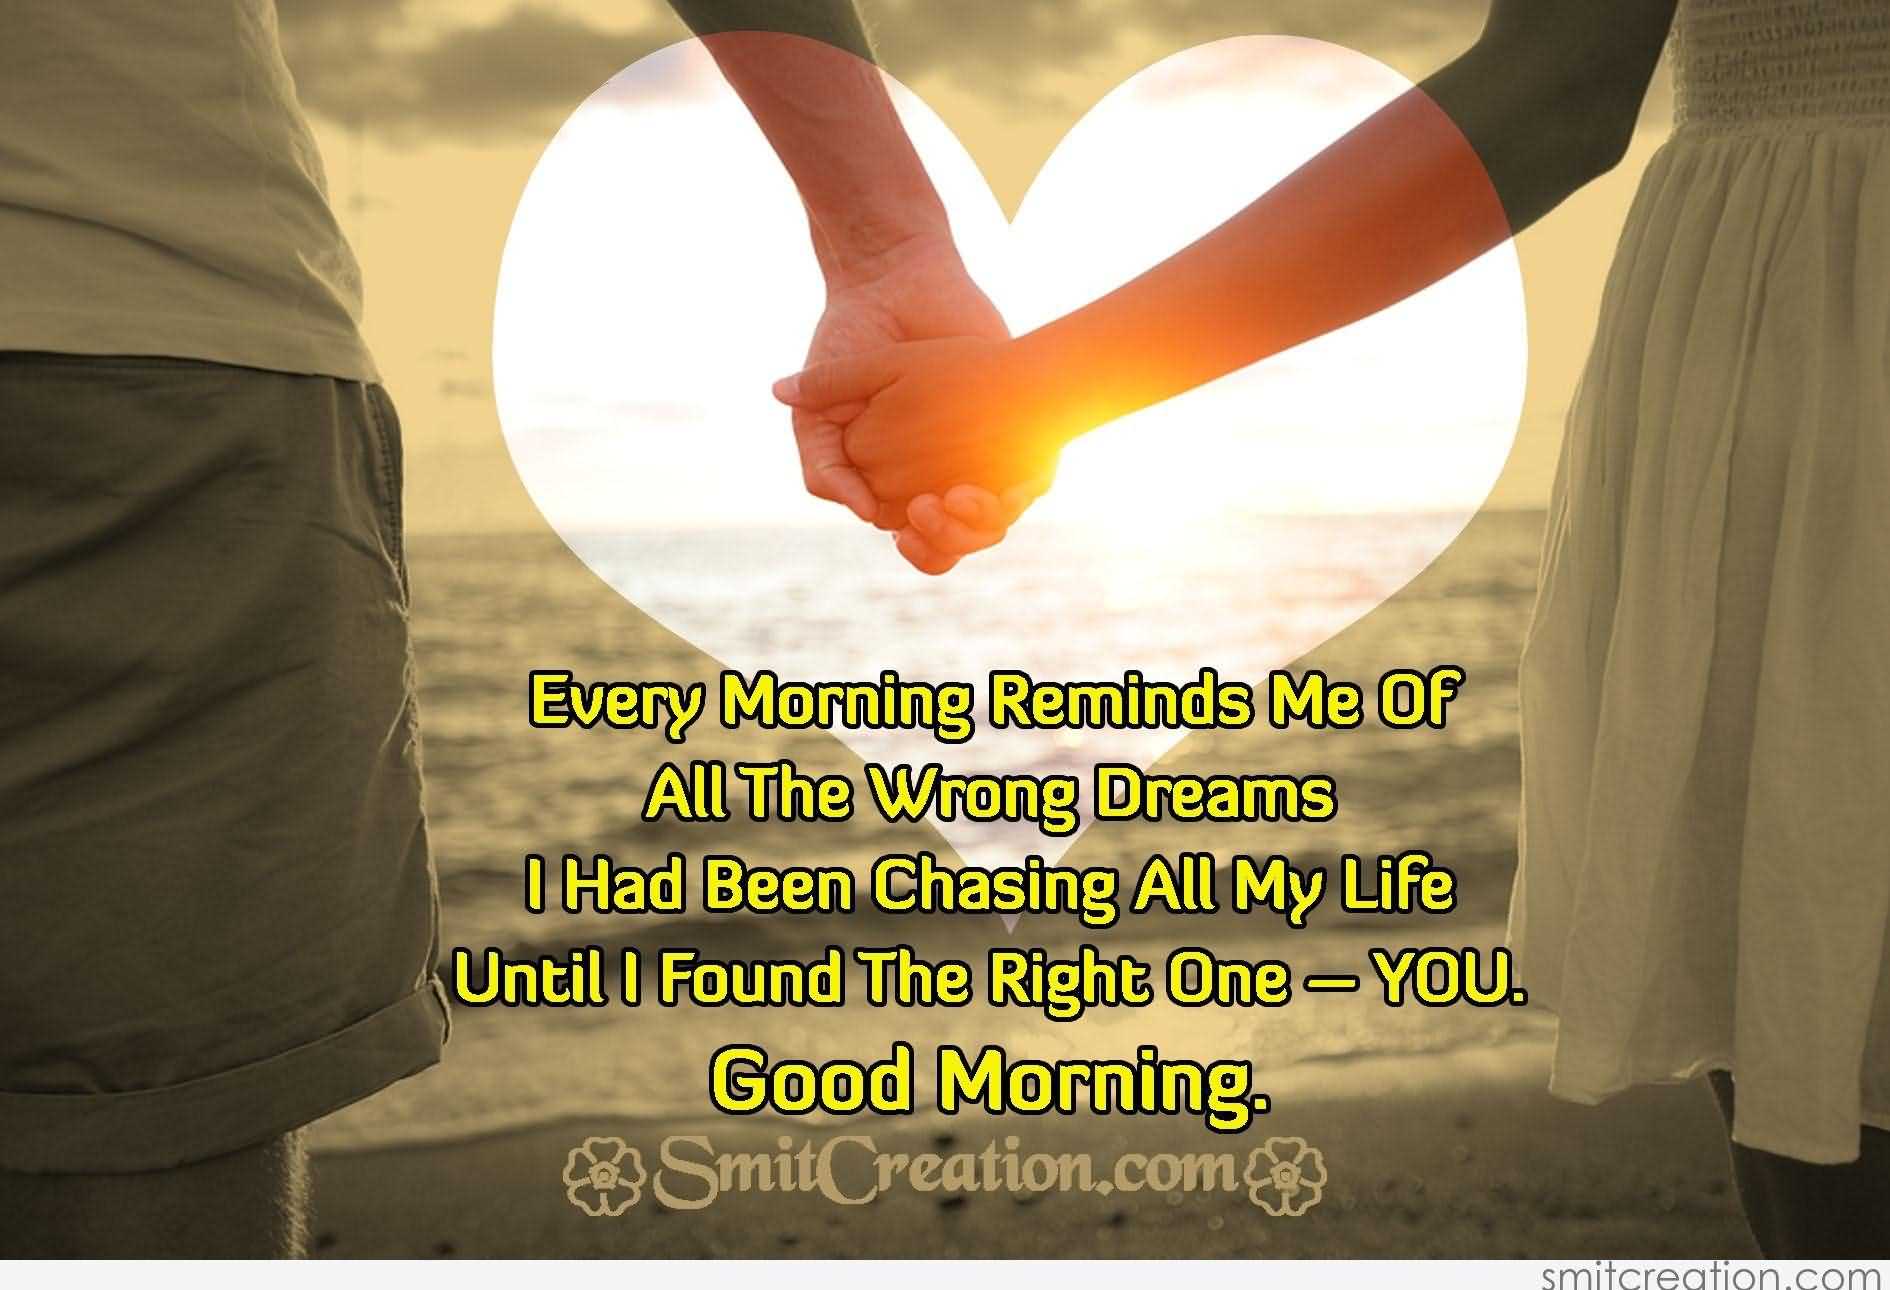 Good Morning Wishes For Girlfriend Image - Special Good Morning Wishes For Girlfriend - HD Wallpaper 